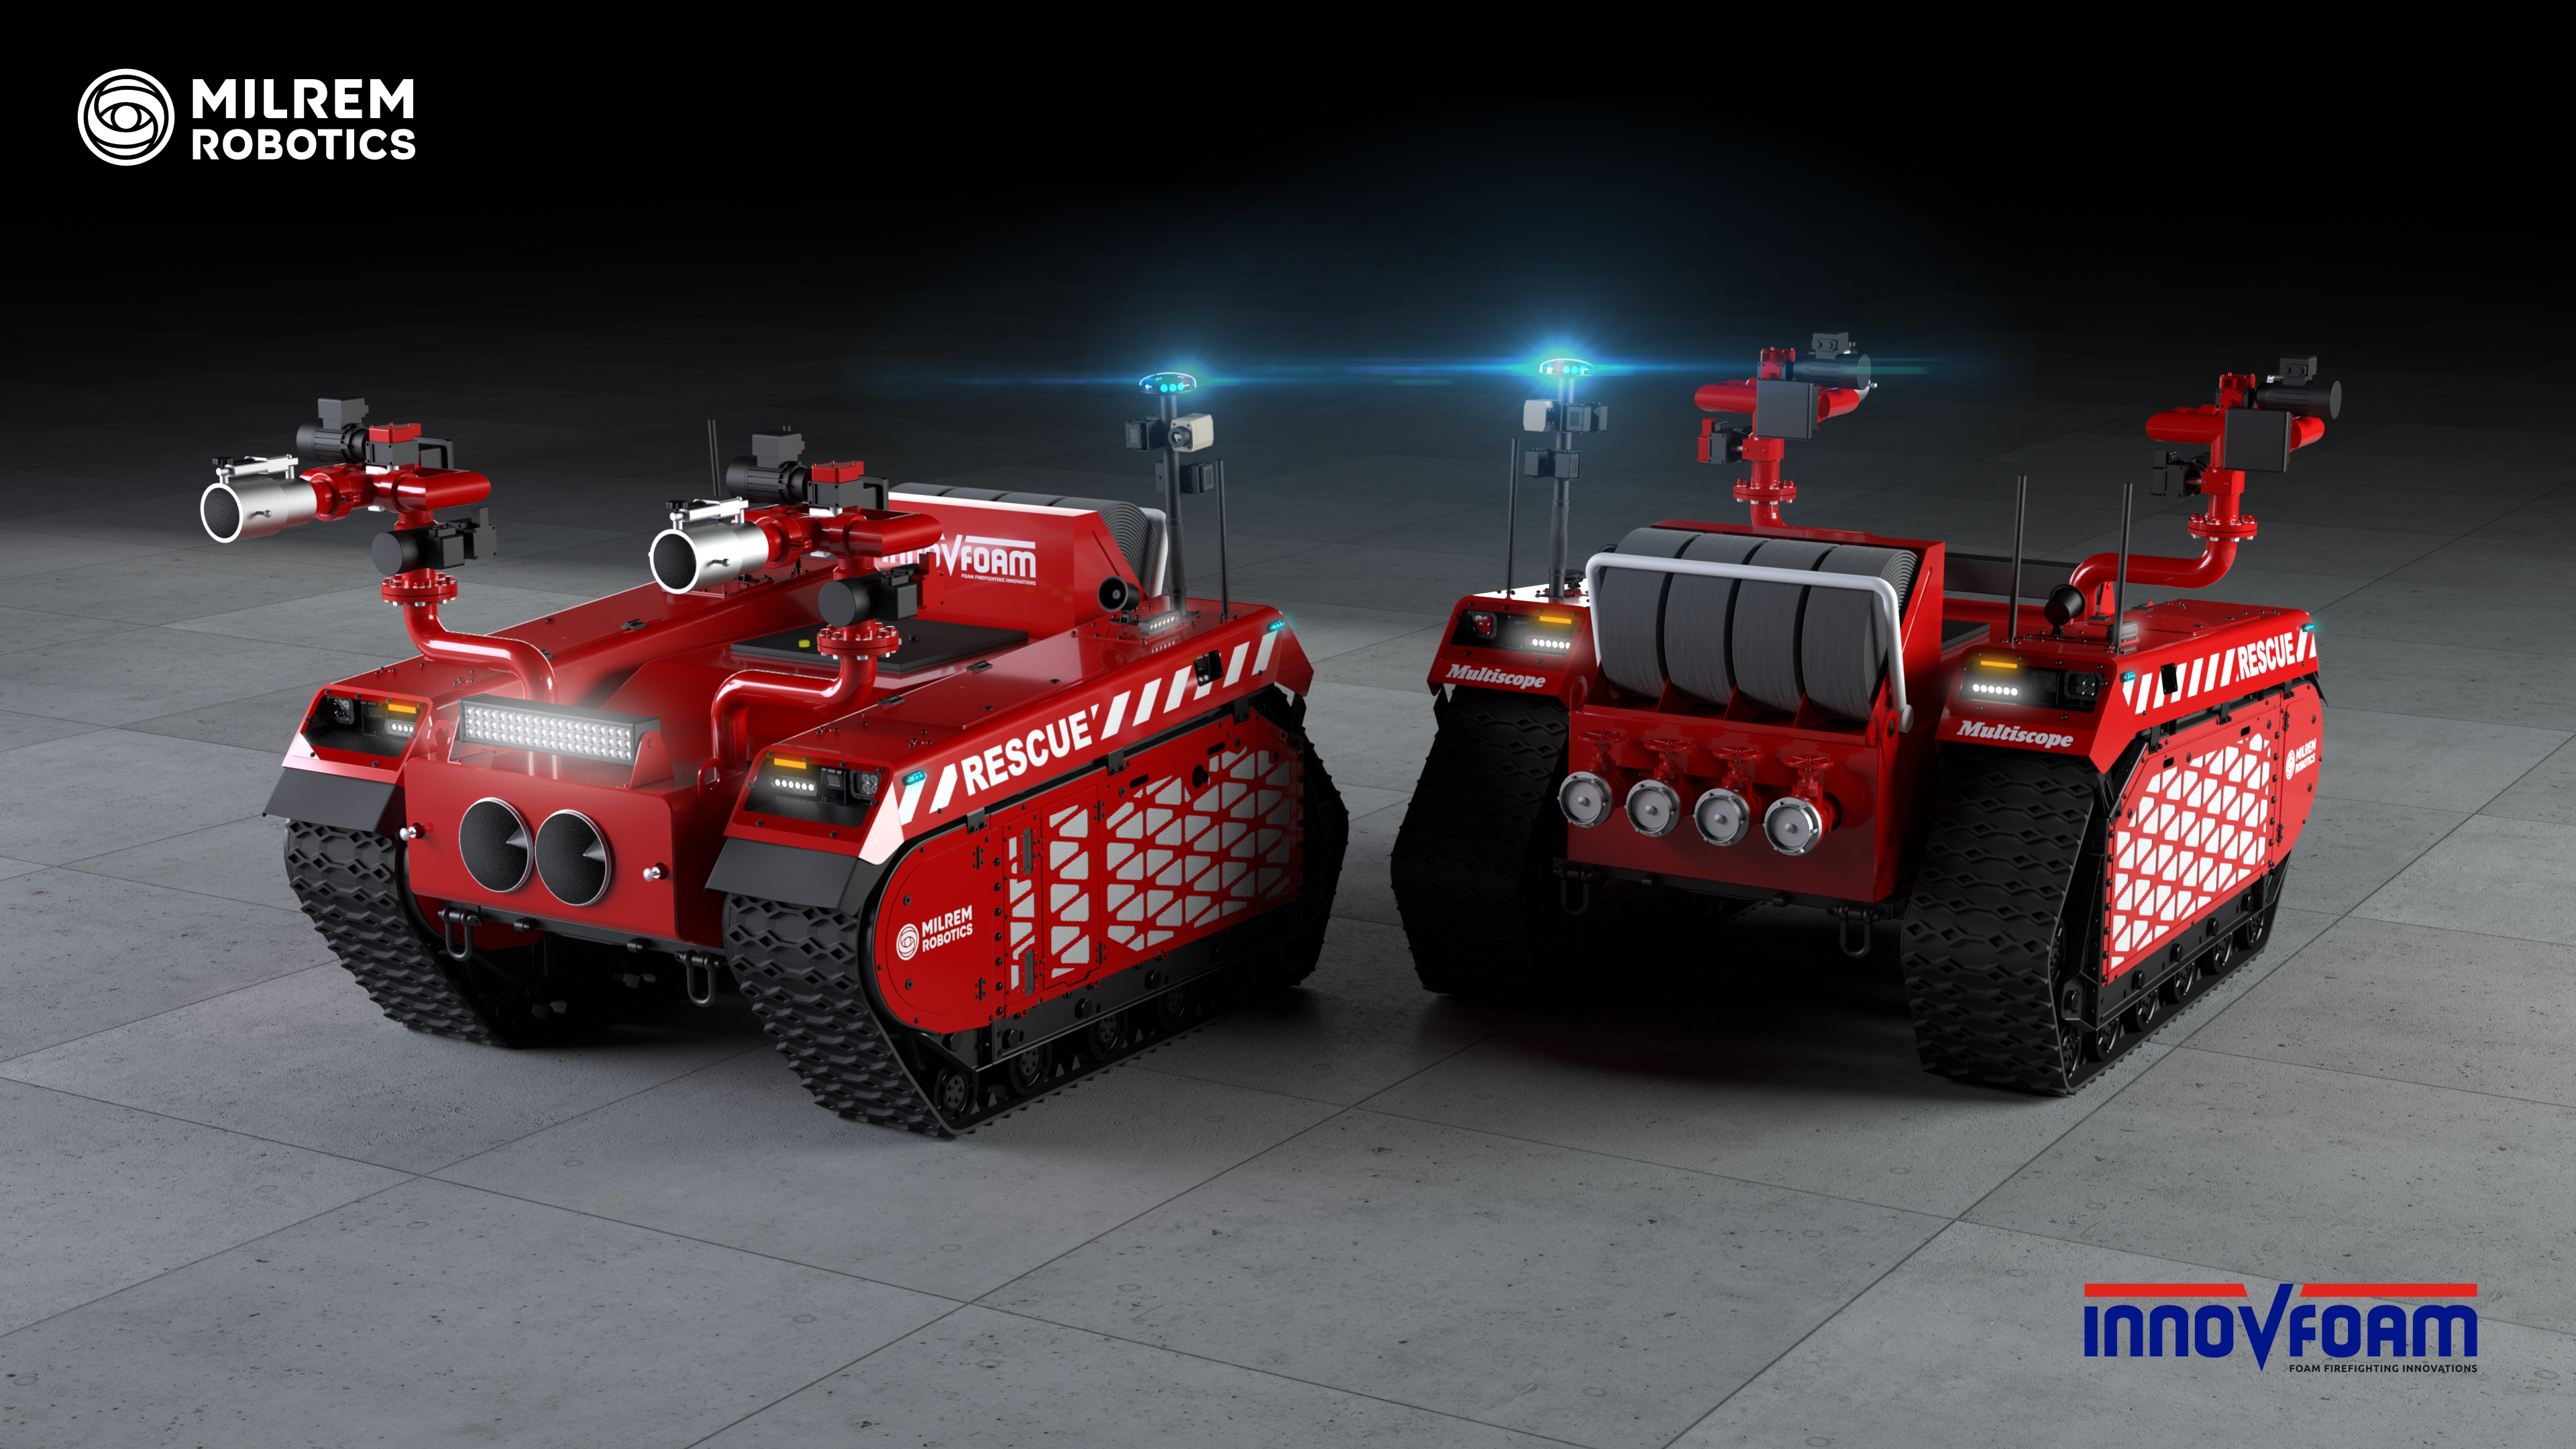 This Firefighting Robot Looks Absolutely Awesome